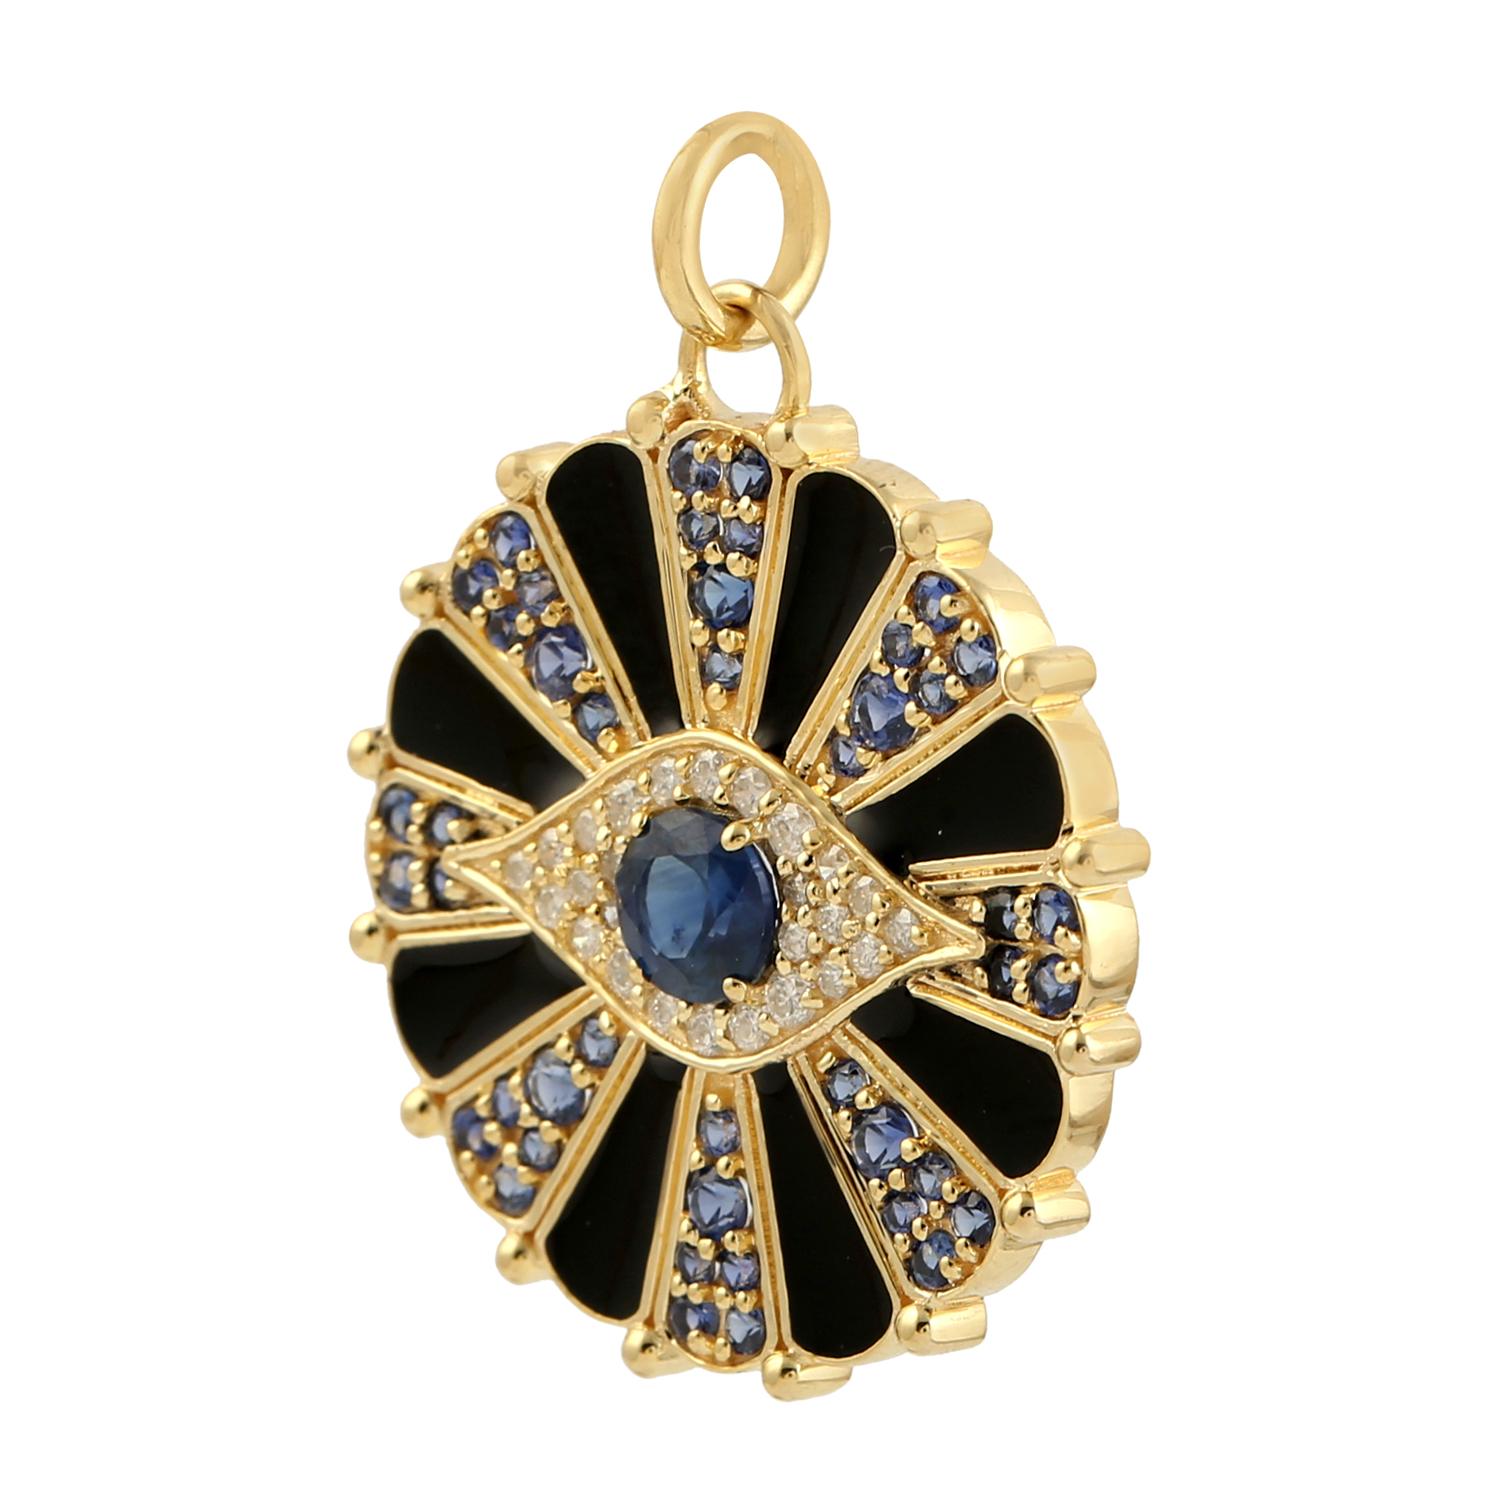 The 14 karat gold pendant is hand set with 1.4 carats blue sapphire and .27 carats sparkling diamonds. 

FOLLOW MEGHNA JEWELS storefront to view the latest collection & exclusive pieces. Meghna Jewels is proudly rated as a Top Seller on 1stdibs with